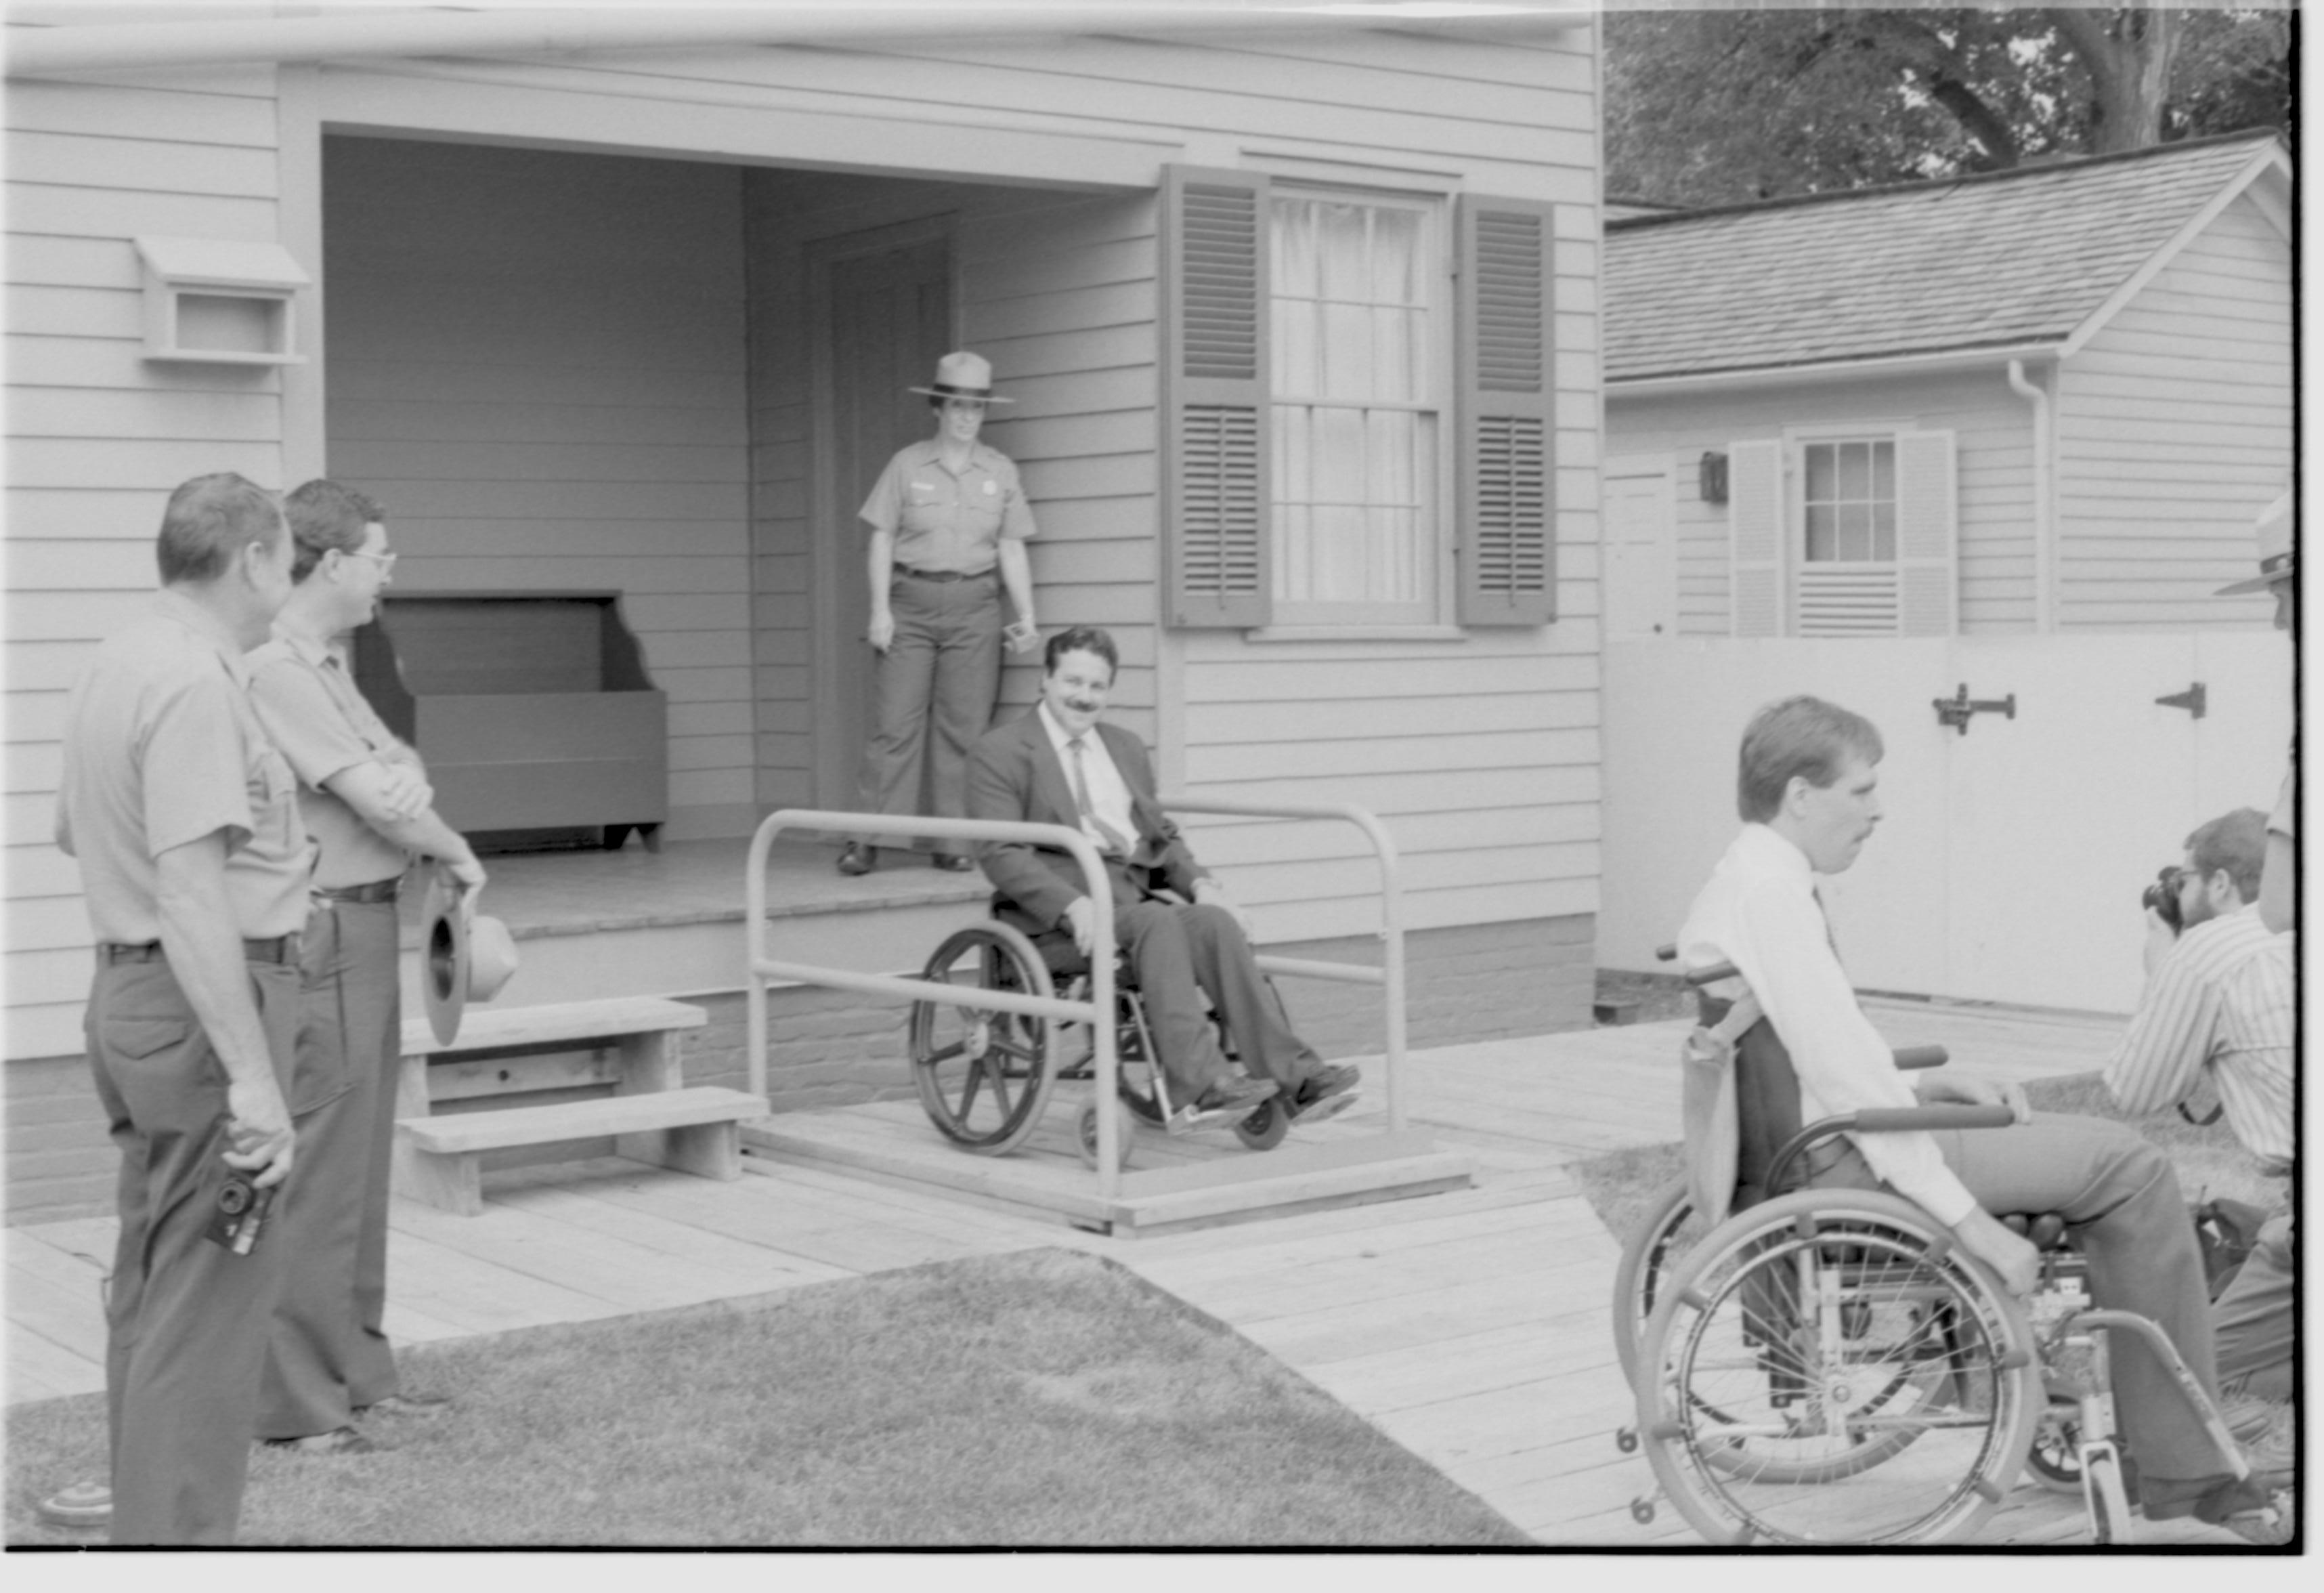 Lincoln Home wheelchair lift partially retracted. One man in wheelchair on lift, with one man in wheelchair and a photographer to right of picture. Staff member Judith Winkelmann on back porch using lift controls. Superintendent Norman Hellmers and second staff member on left of photo. Corneau house in background. Photographer facing north west.